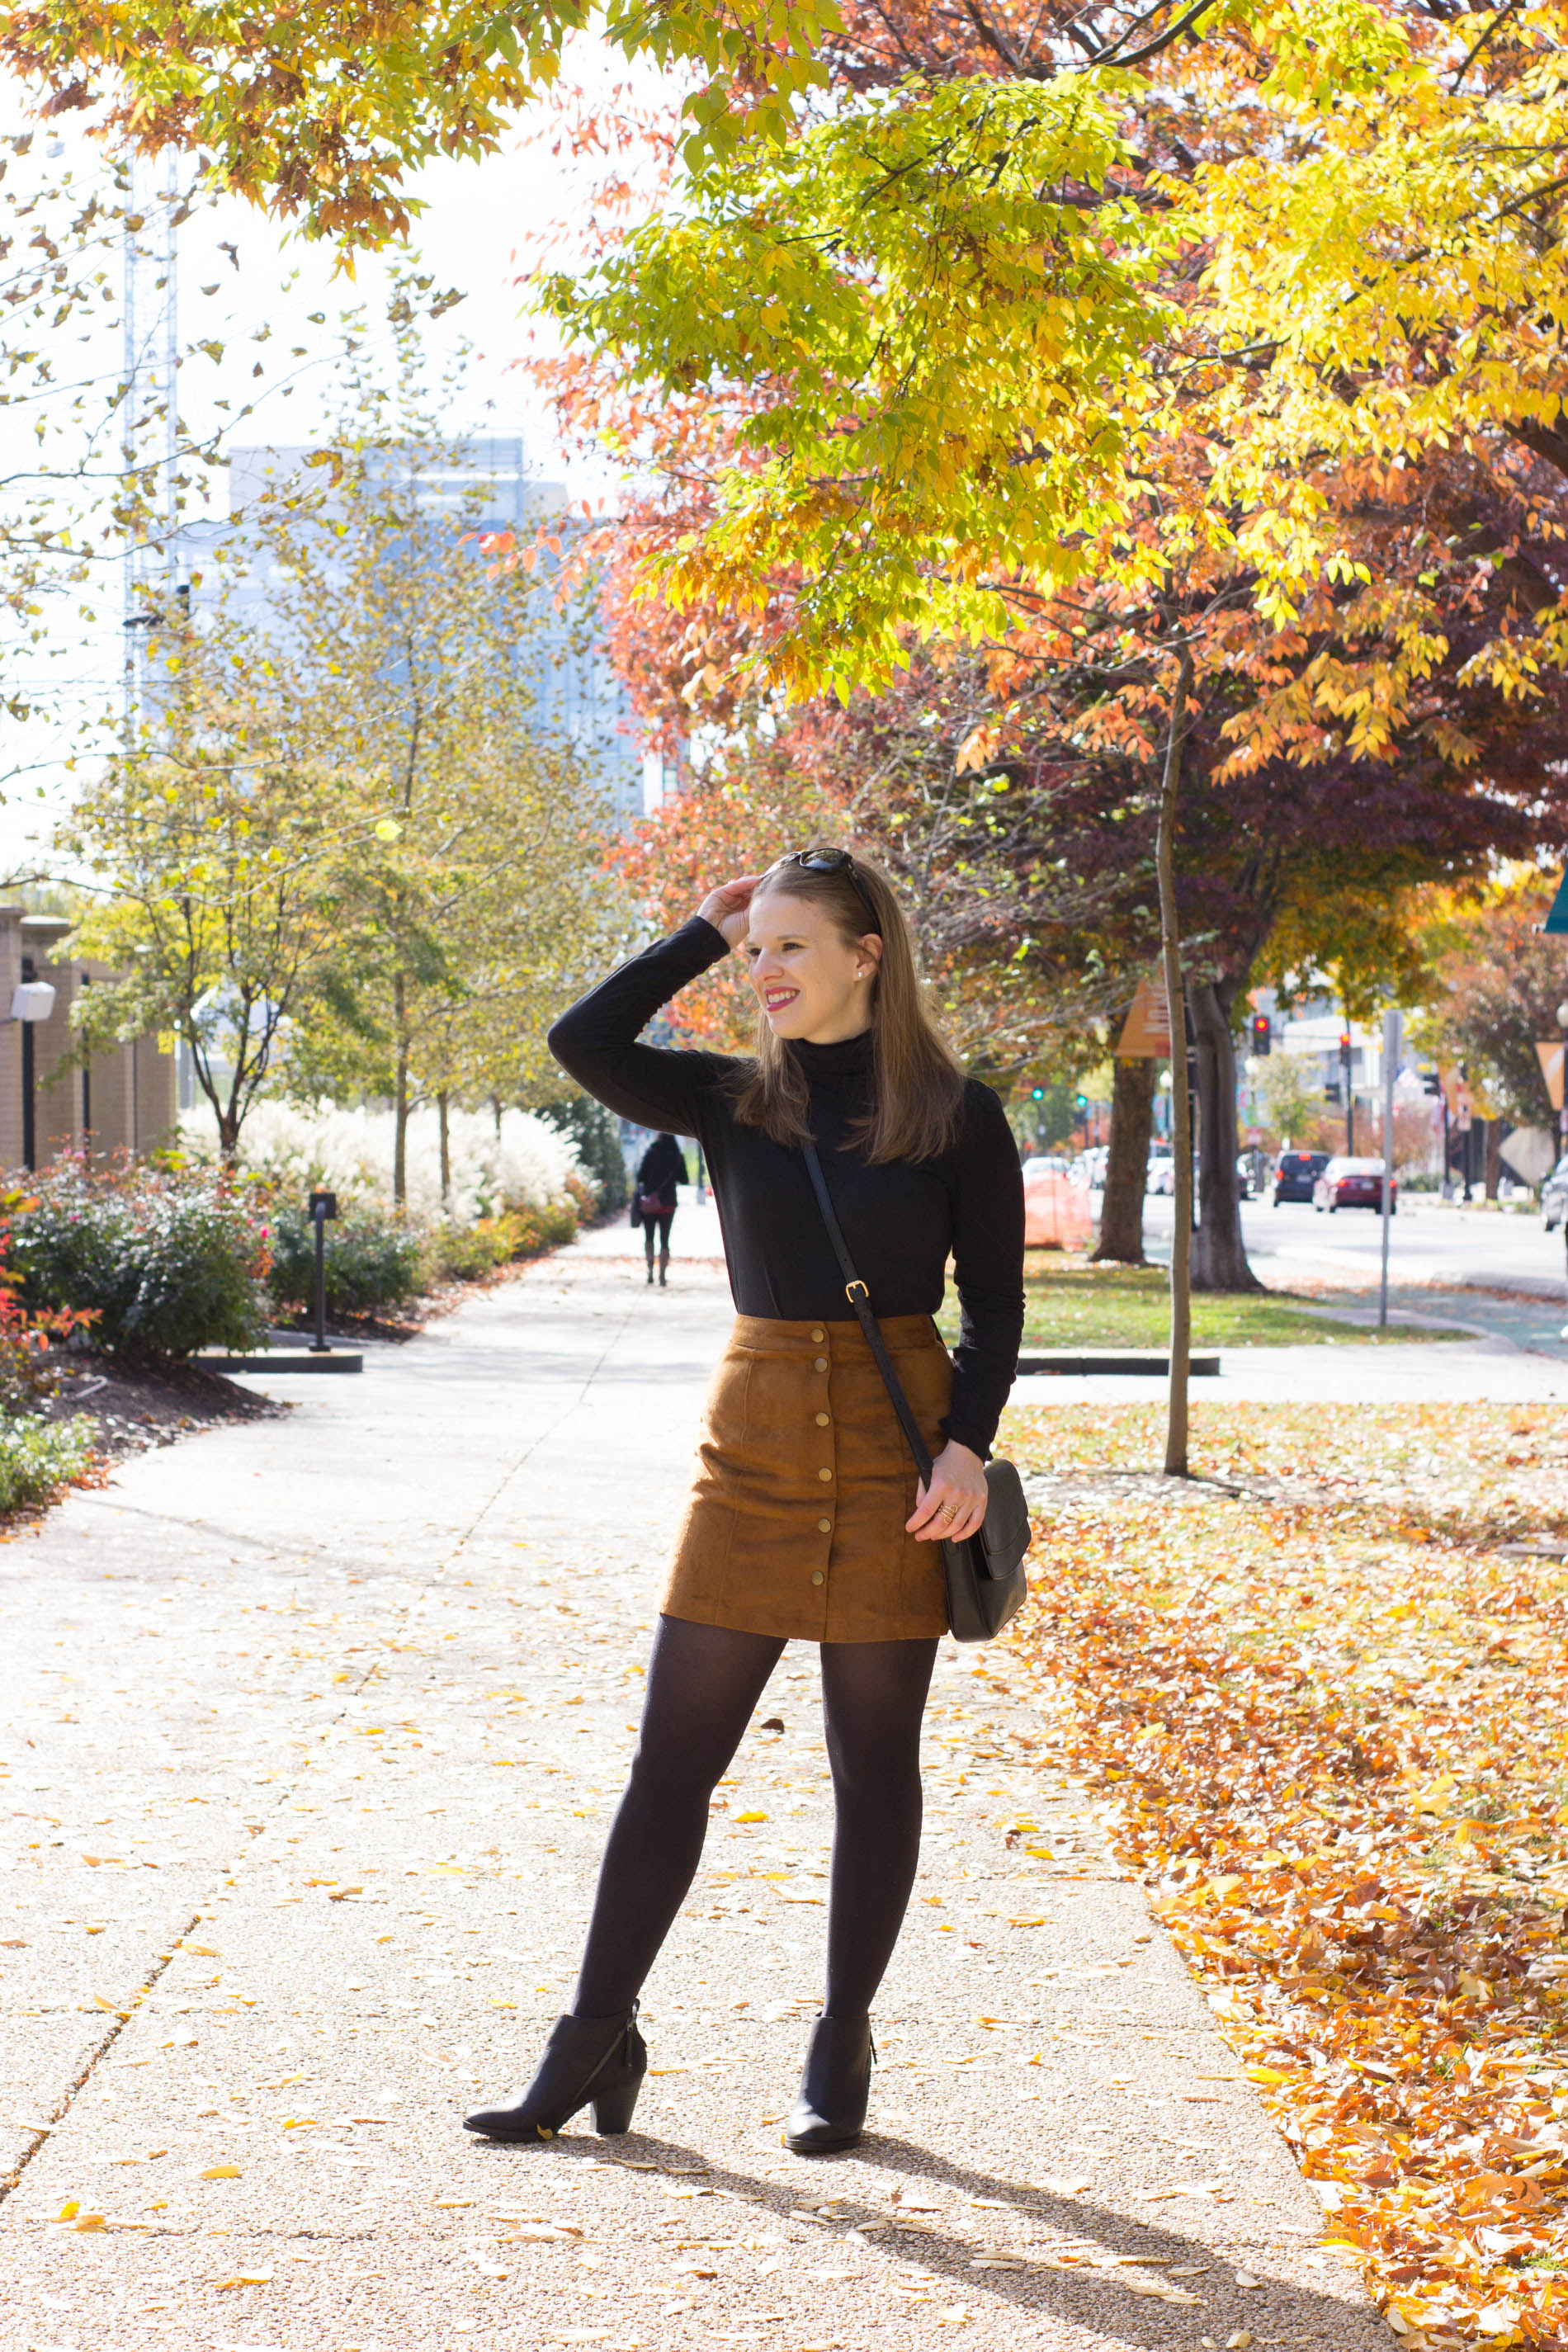 What to Wear to a Friendsgiving | Something Good, @danaerinw , thanksgiving, outfits, holiday outfits, women's clothing, fashion, style, suede skirt, button front skirt, black turtleneck, turtleneck, j.crew, crossbody bag, black tights, black ankle boots, booties, fall outfits, thanksgiving outfits, holiday style